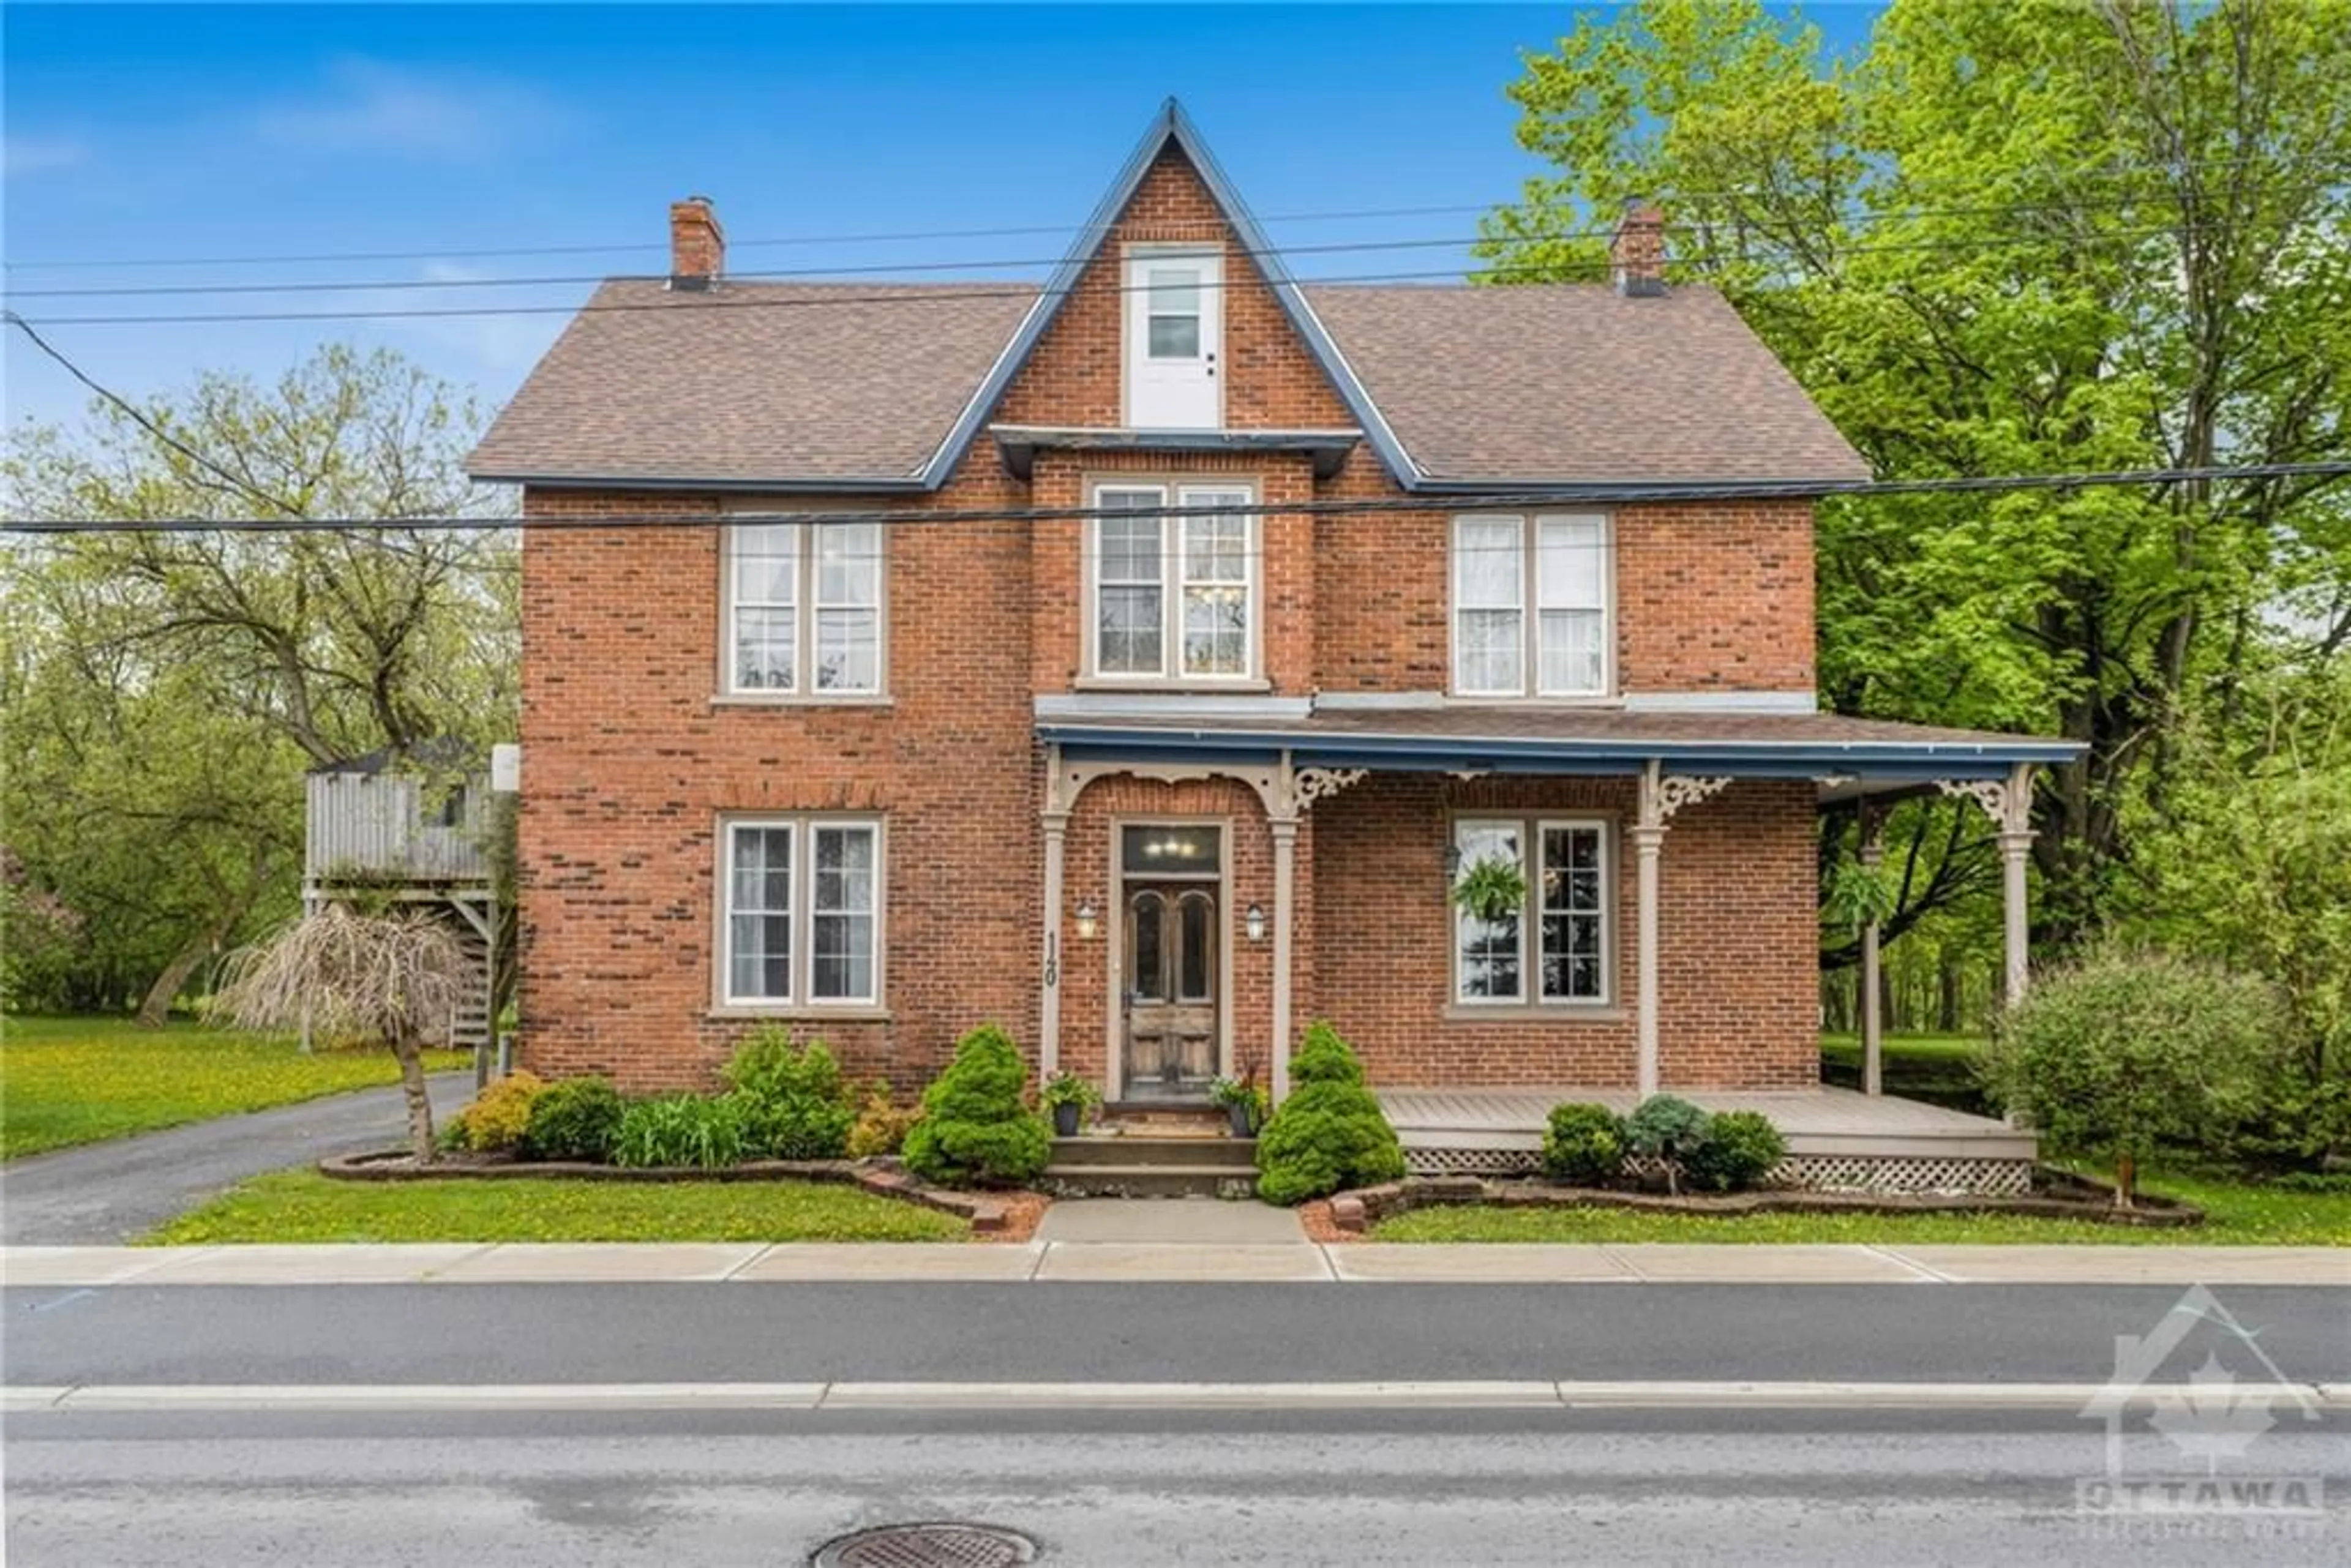 Home with brick exterior material for 140 HIGH St, Vankleek Hill Ontario K0B 1R0